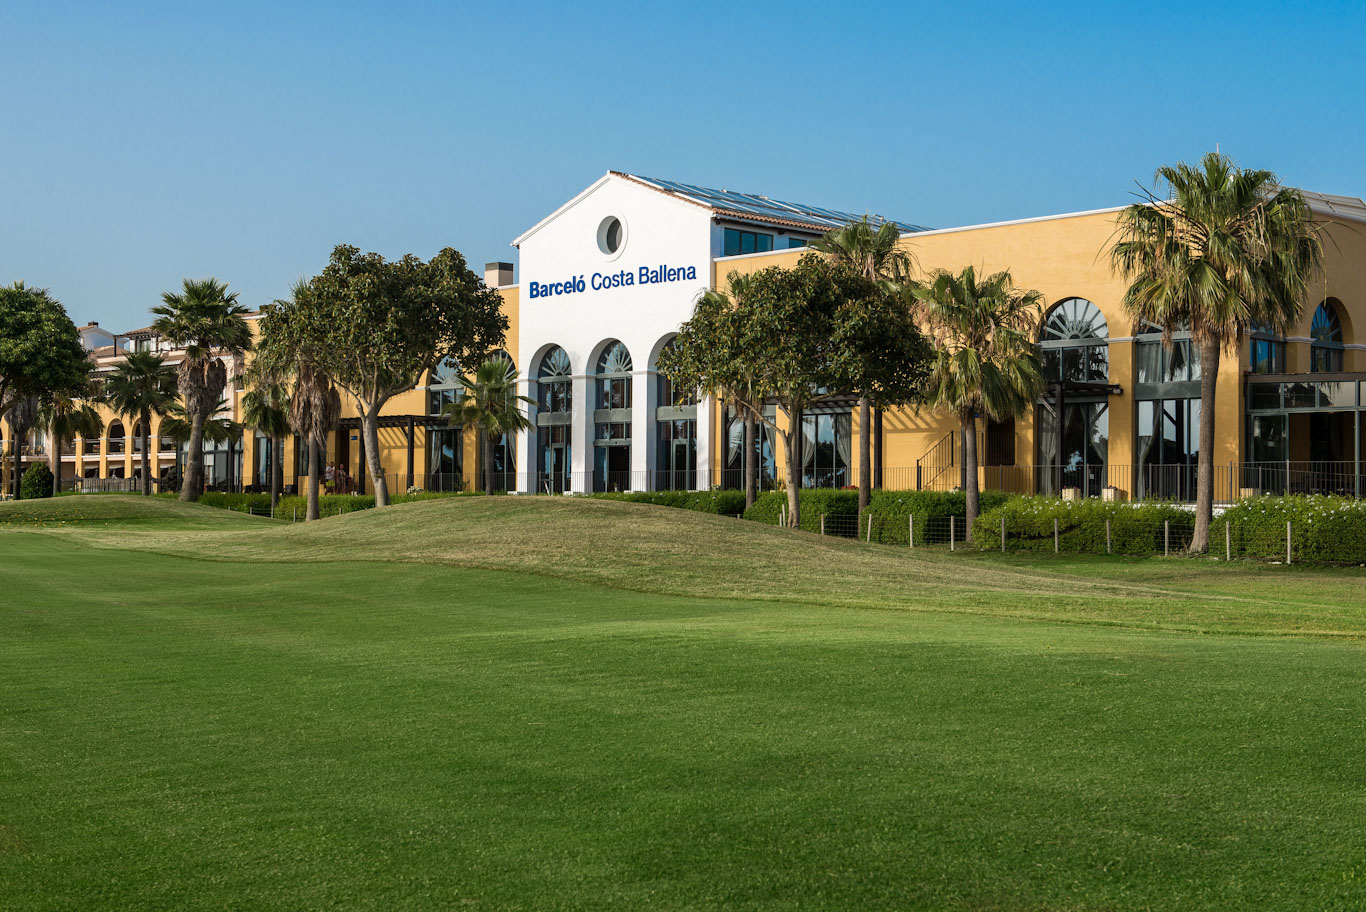 View of the Barcelo Costa Ballena Golf and Spa resort from the golf course